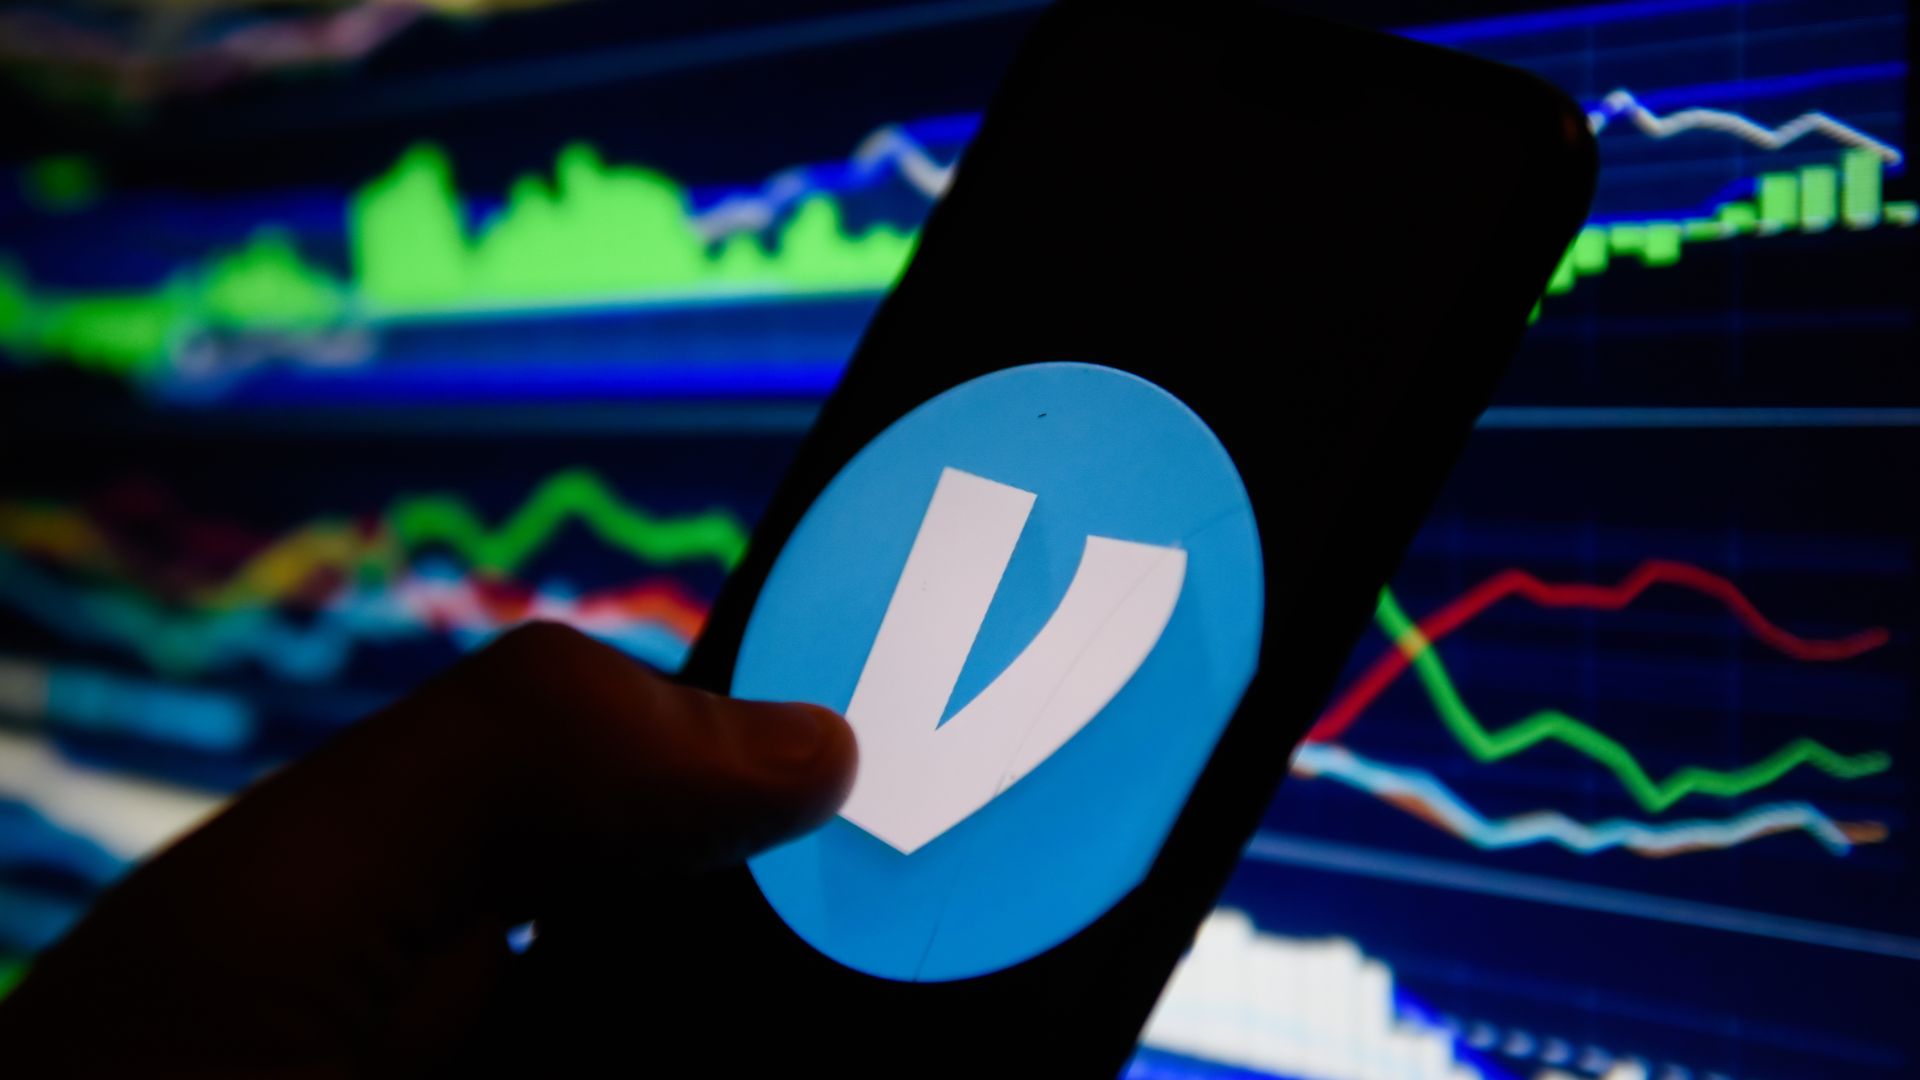 In this image, someone holds a smartphone with the Venmo logo displayed